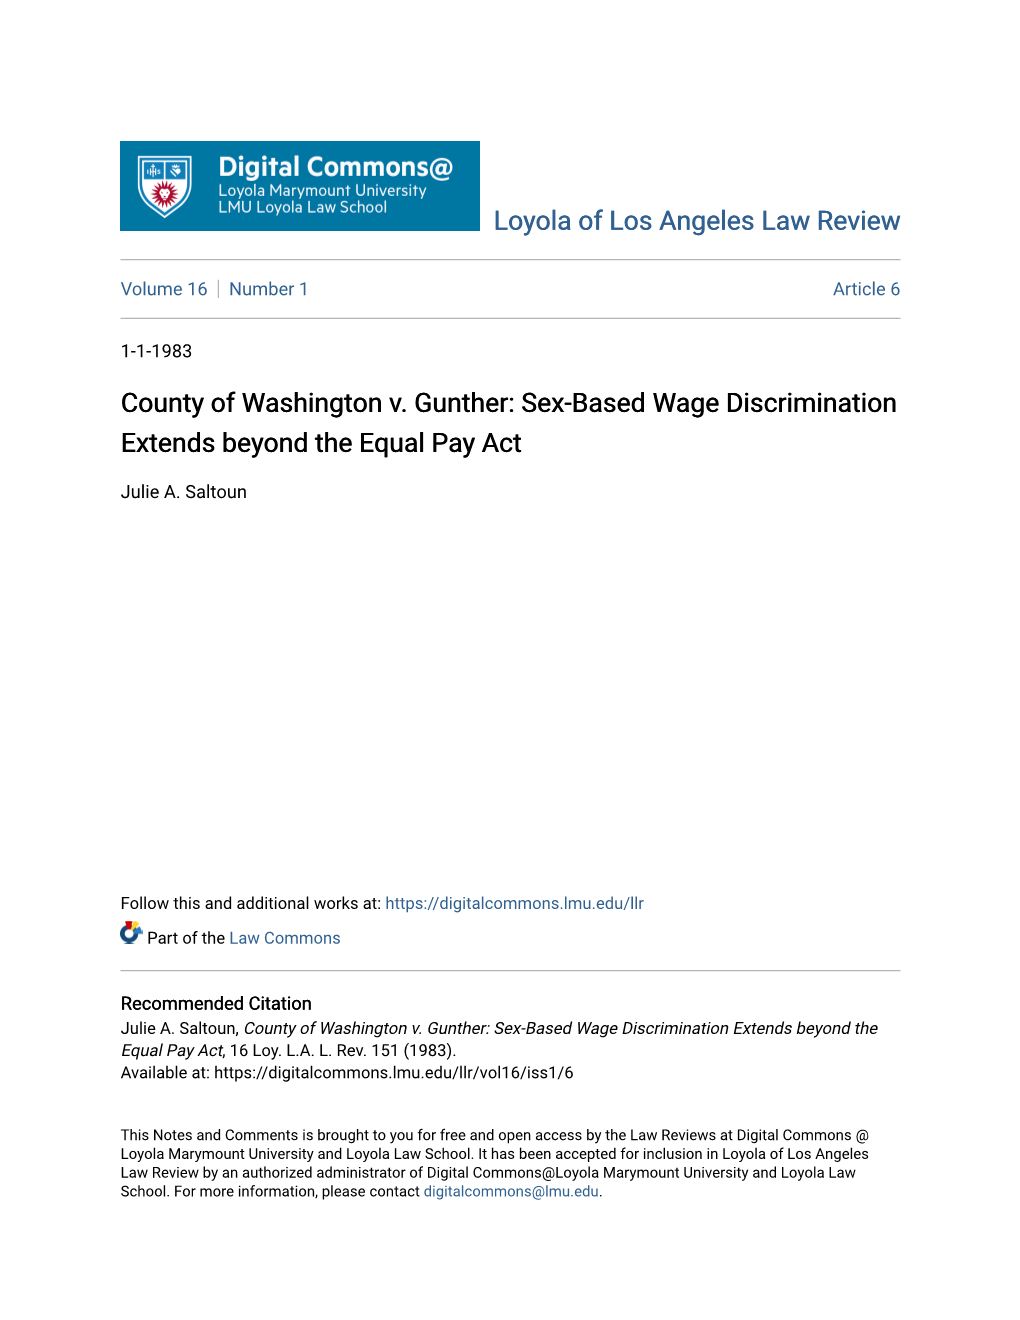 County of Washington V. Gunther: Sex-Based Wage Discrimination Extends Beyond the Equal Pay Act